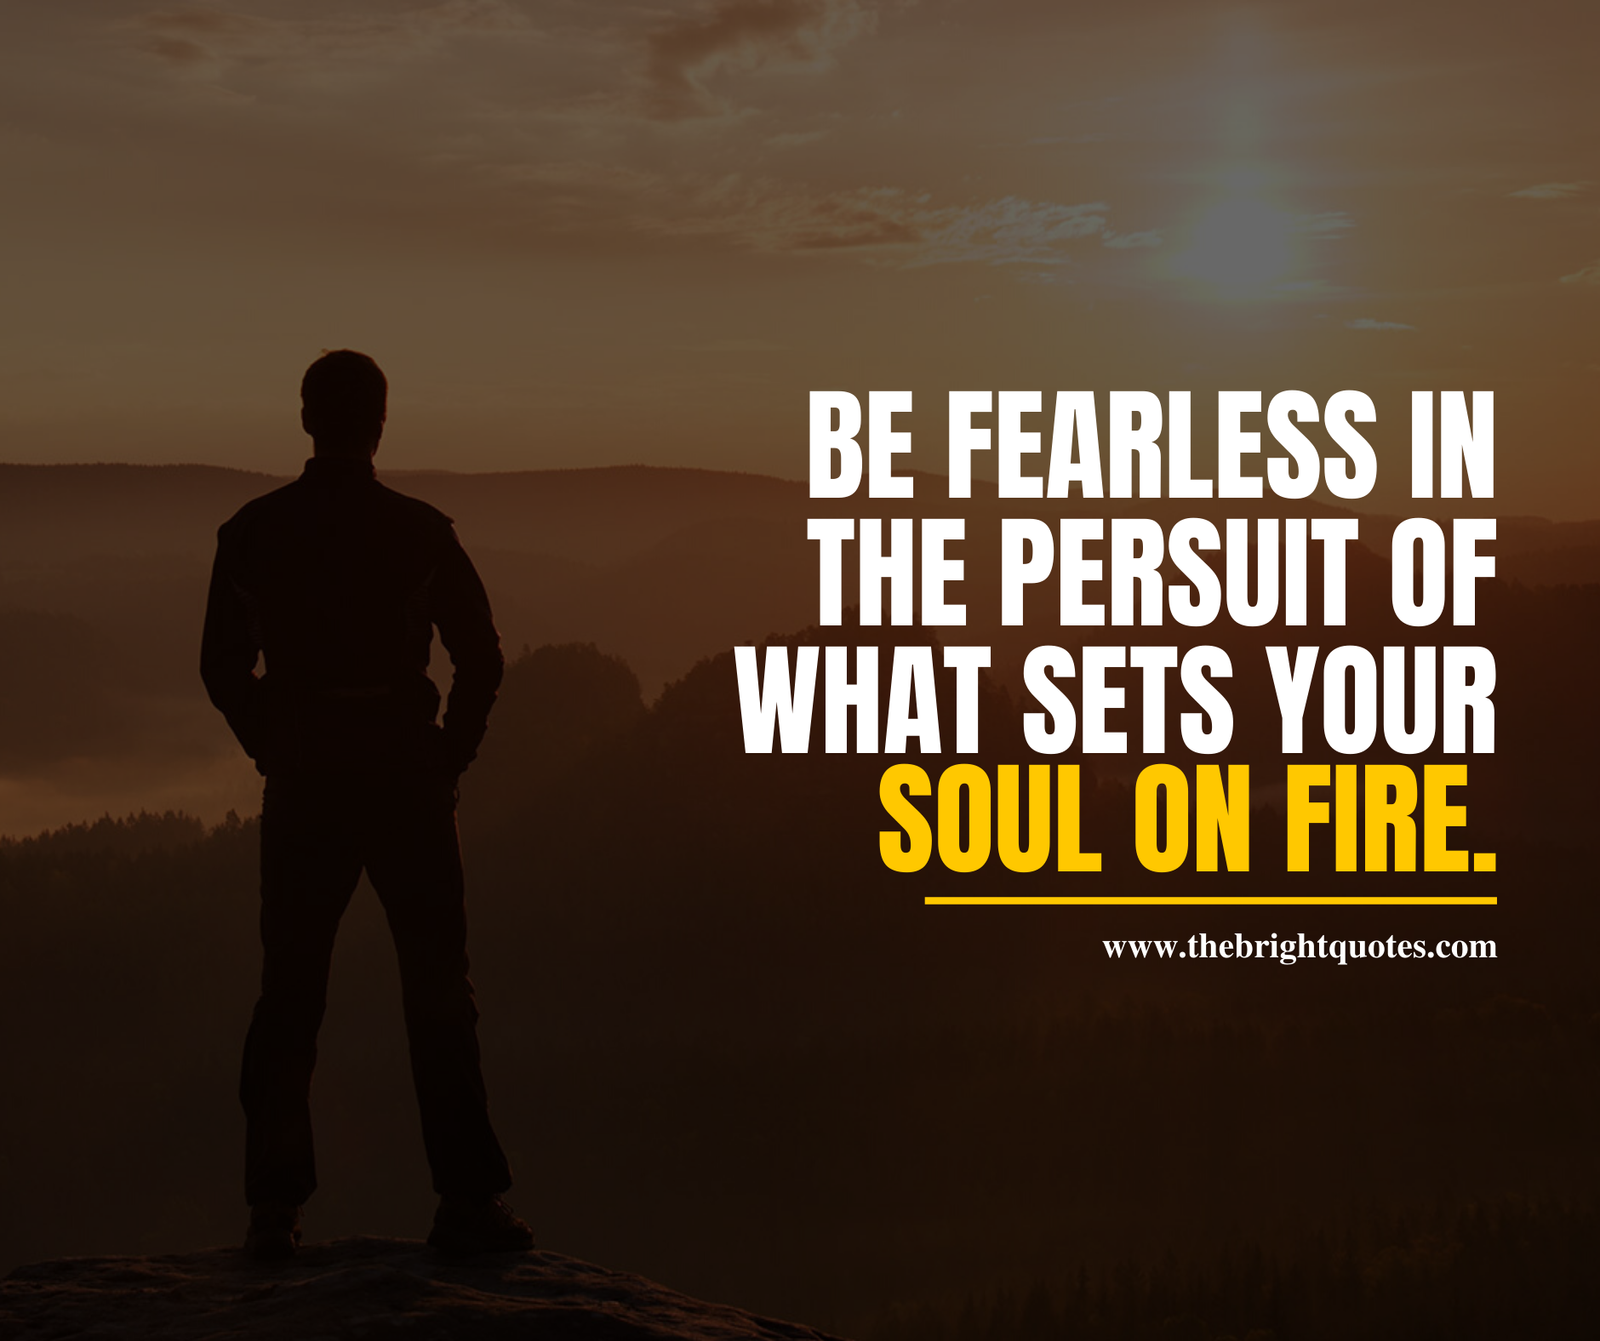 Be fearless in the pursuit of what sets your soul on fire.